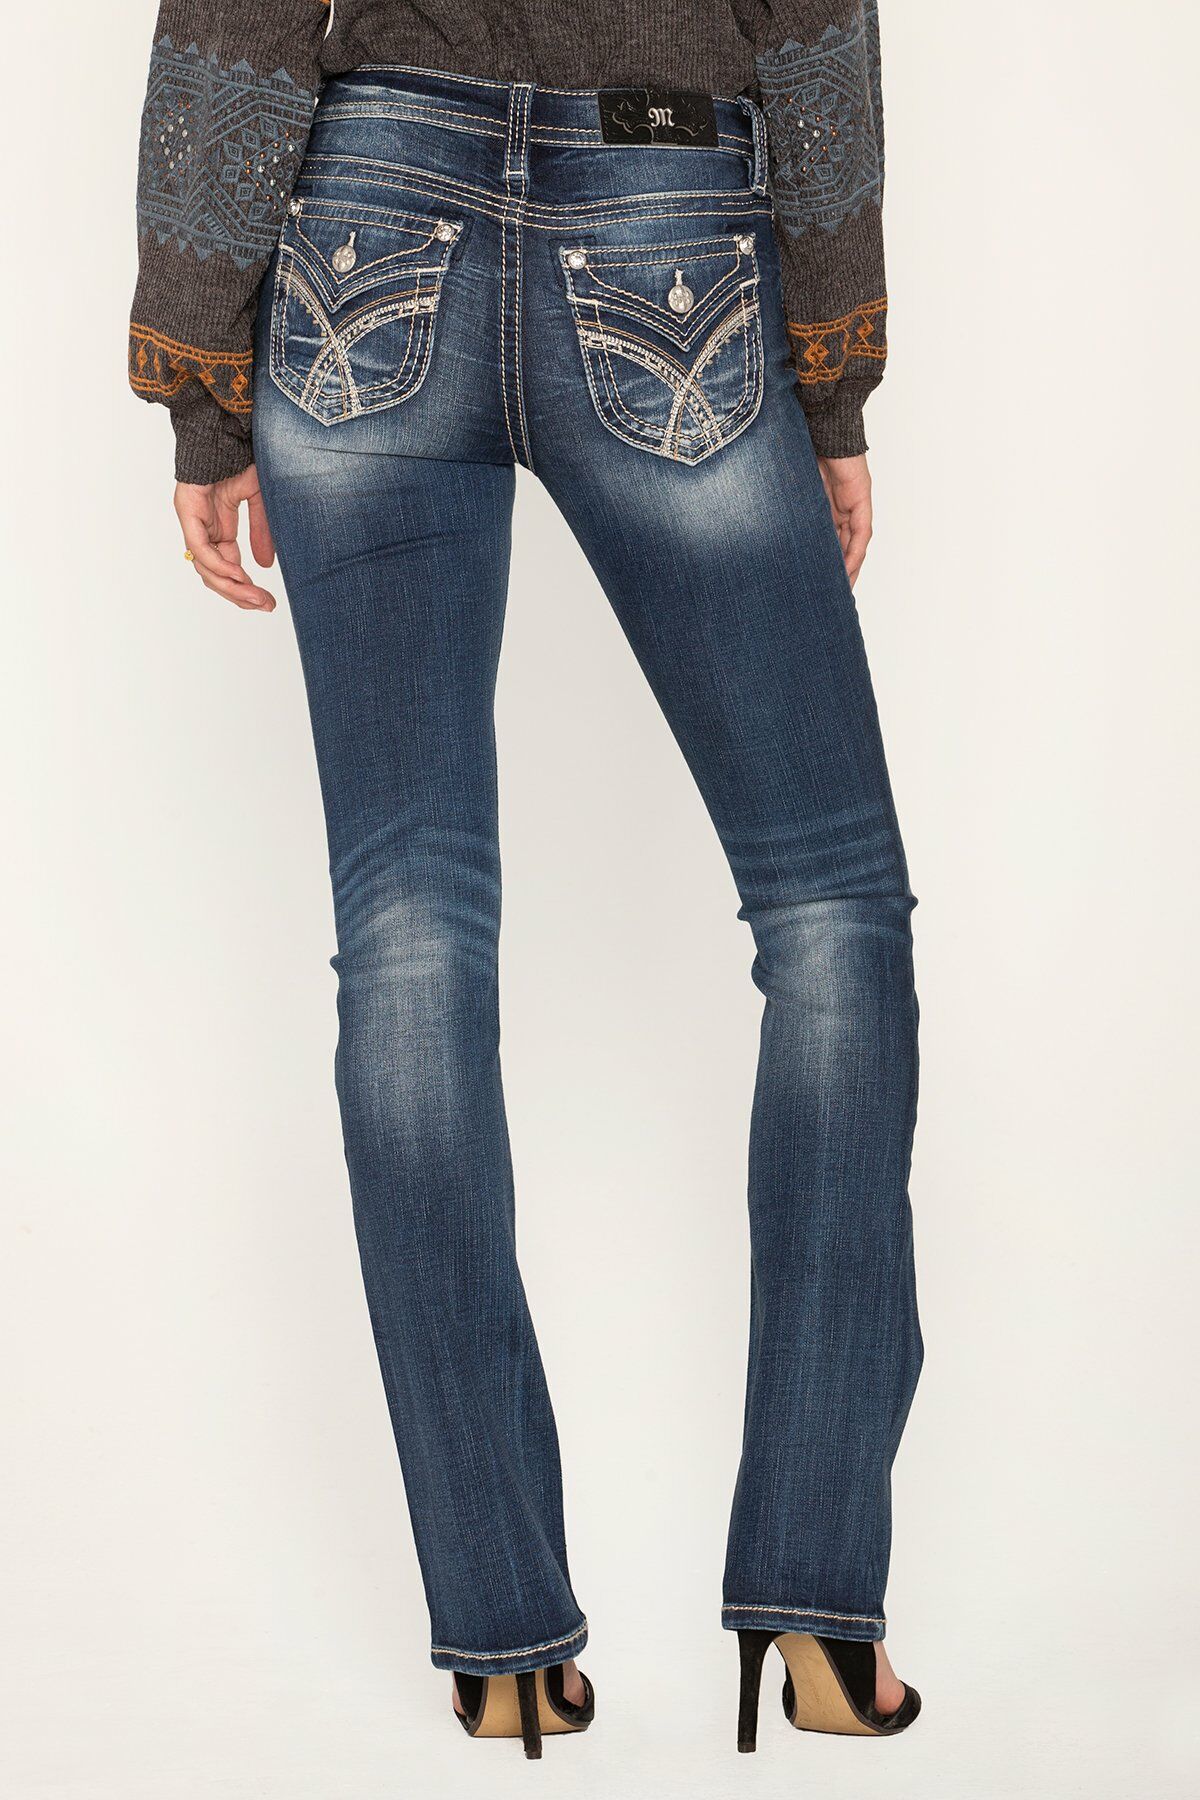 discounted miss me jeans